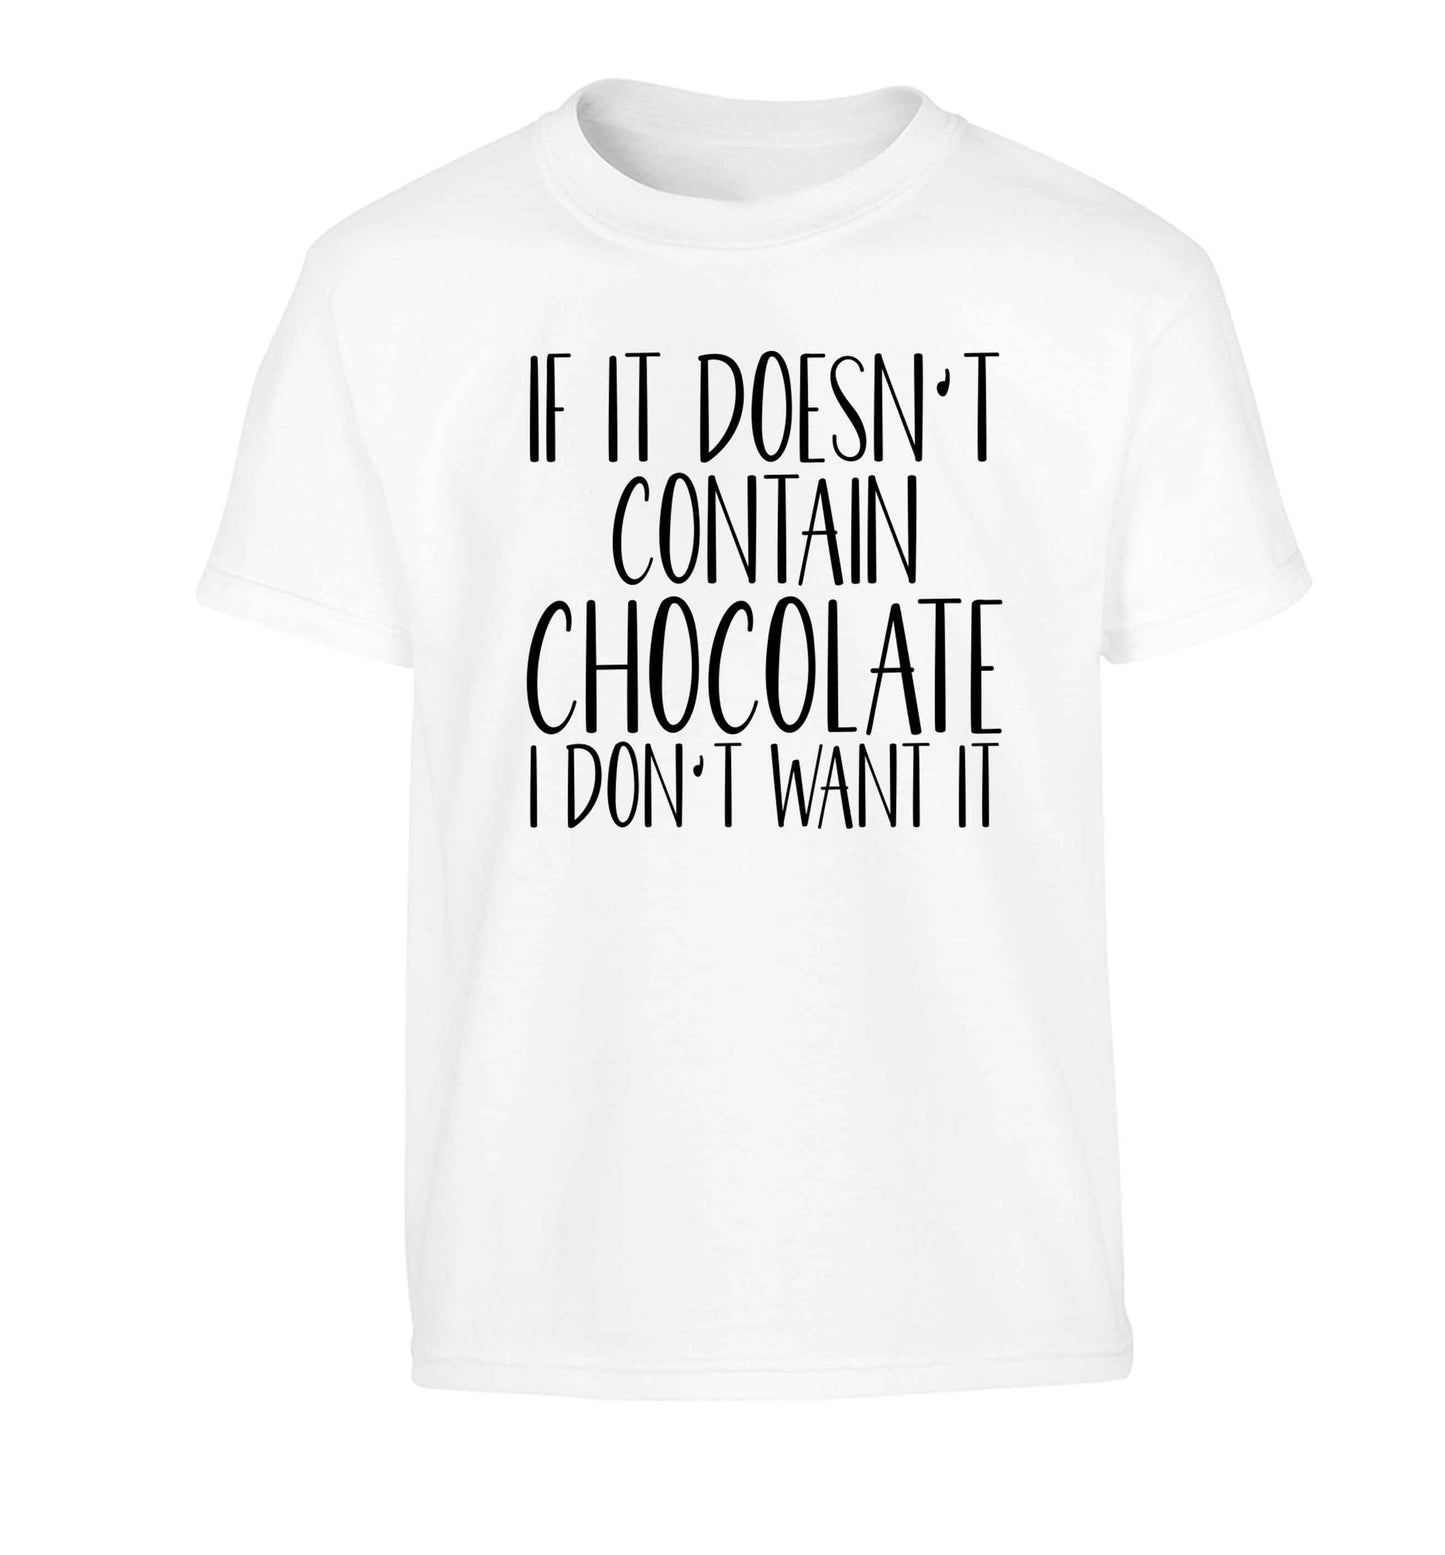 If it doesn't contain chocolate I don't want it Children's white Tshirt 12-13 Years